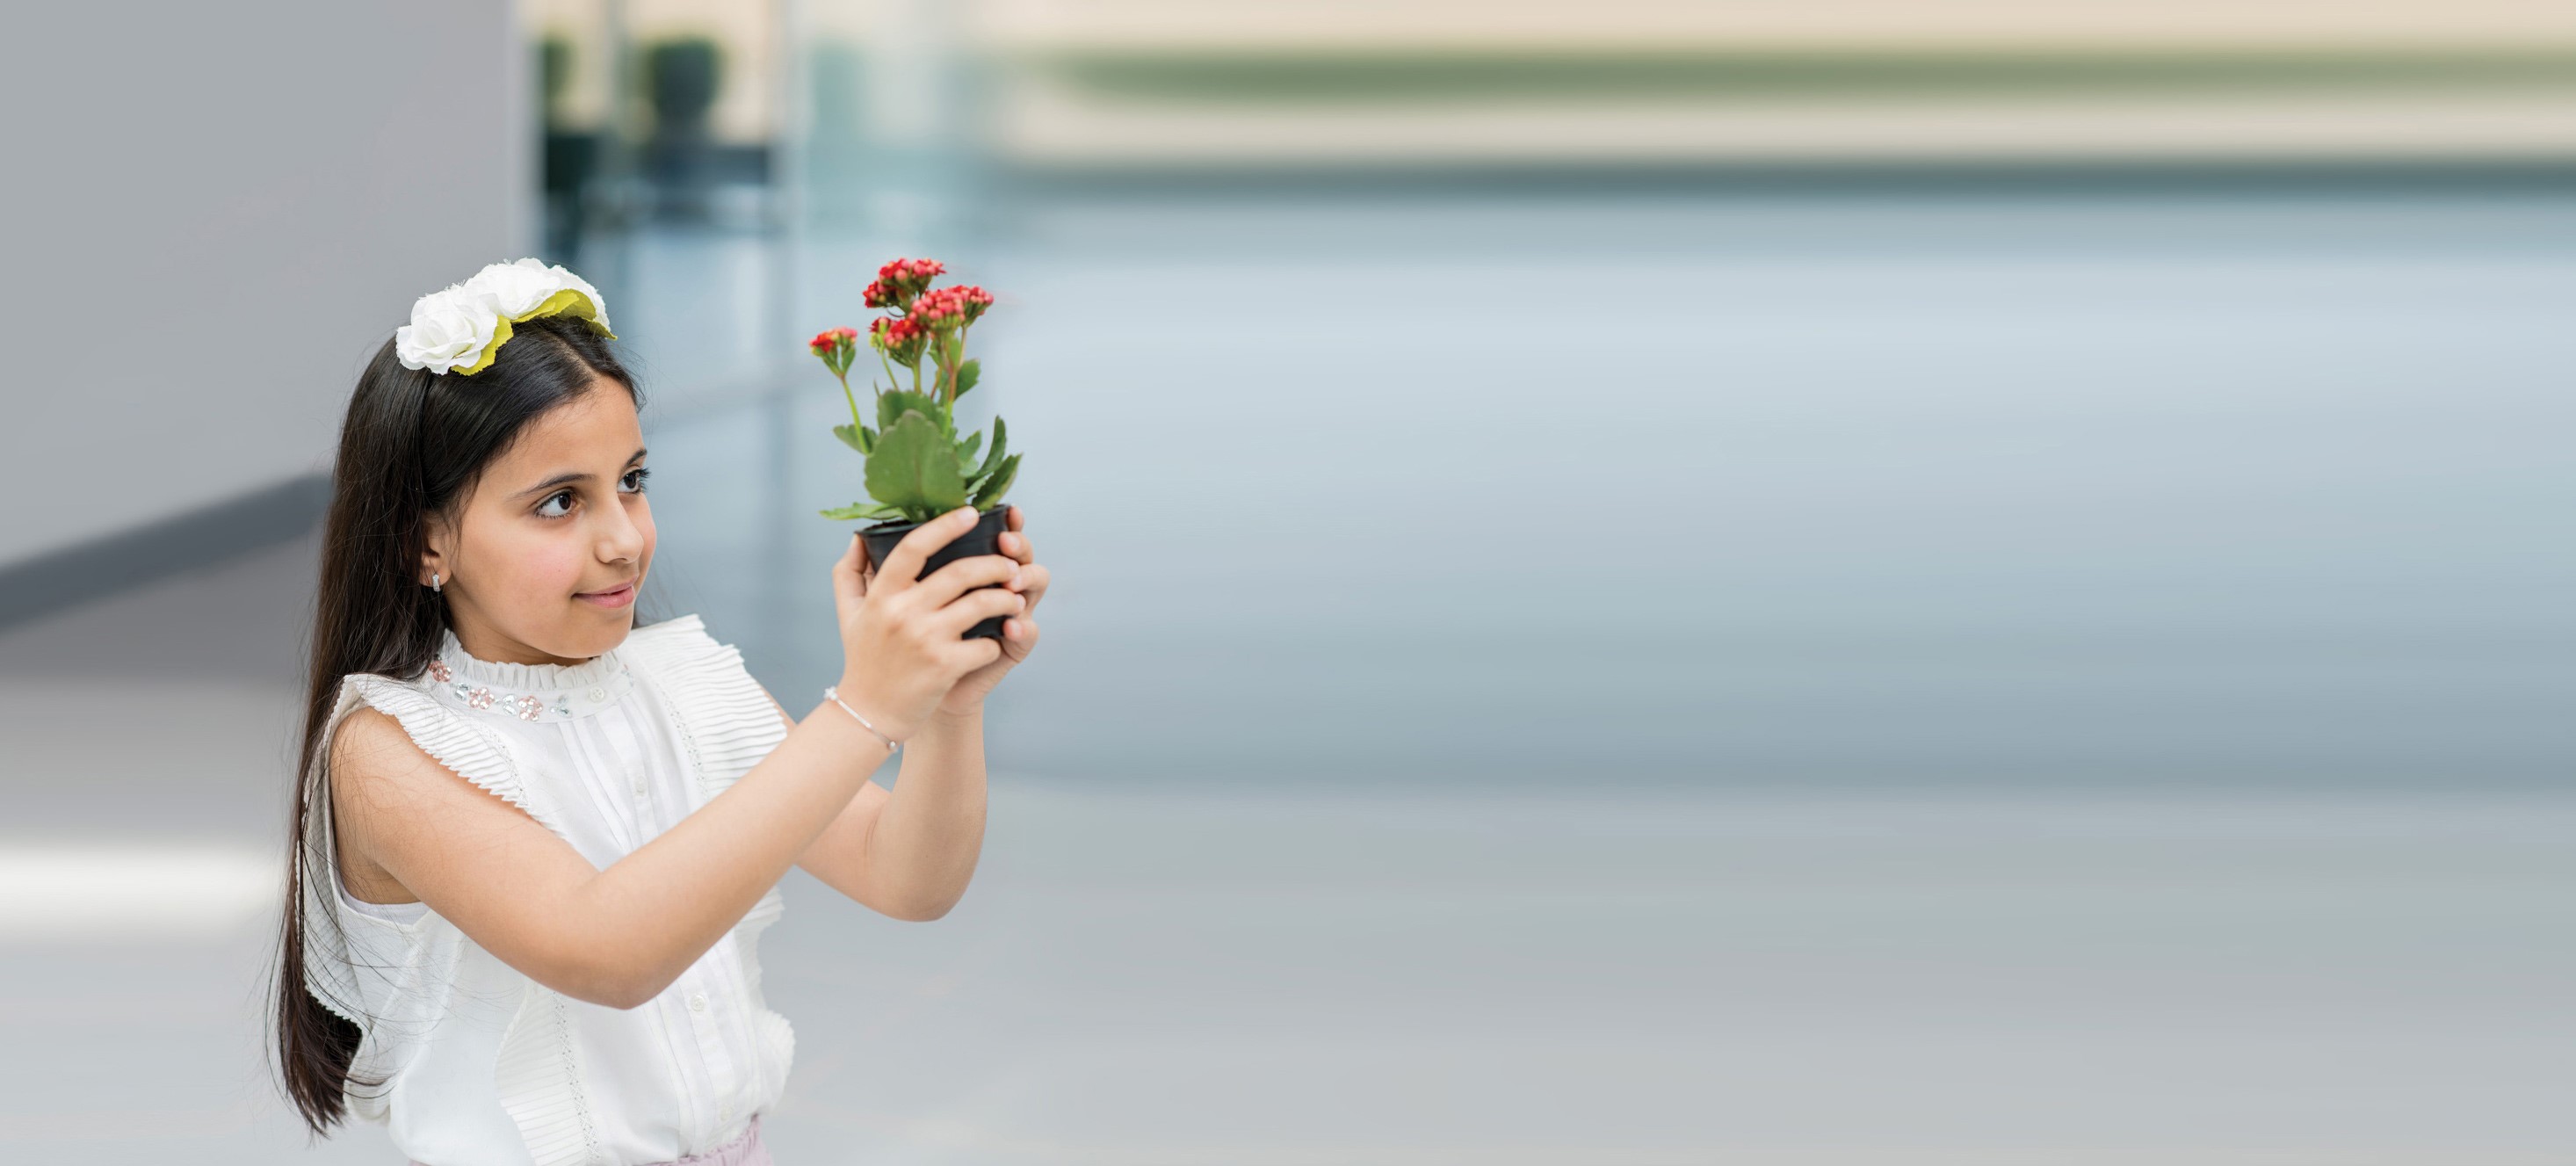 Young girl holding a pot with a red flower